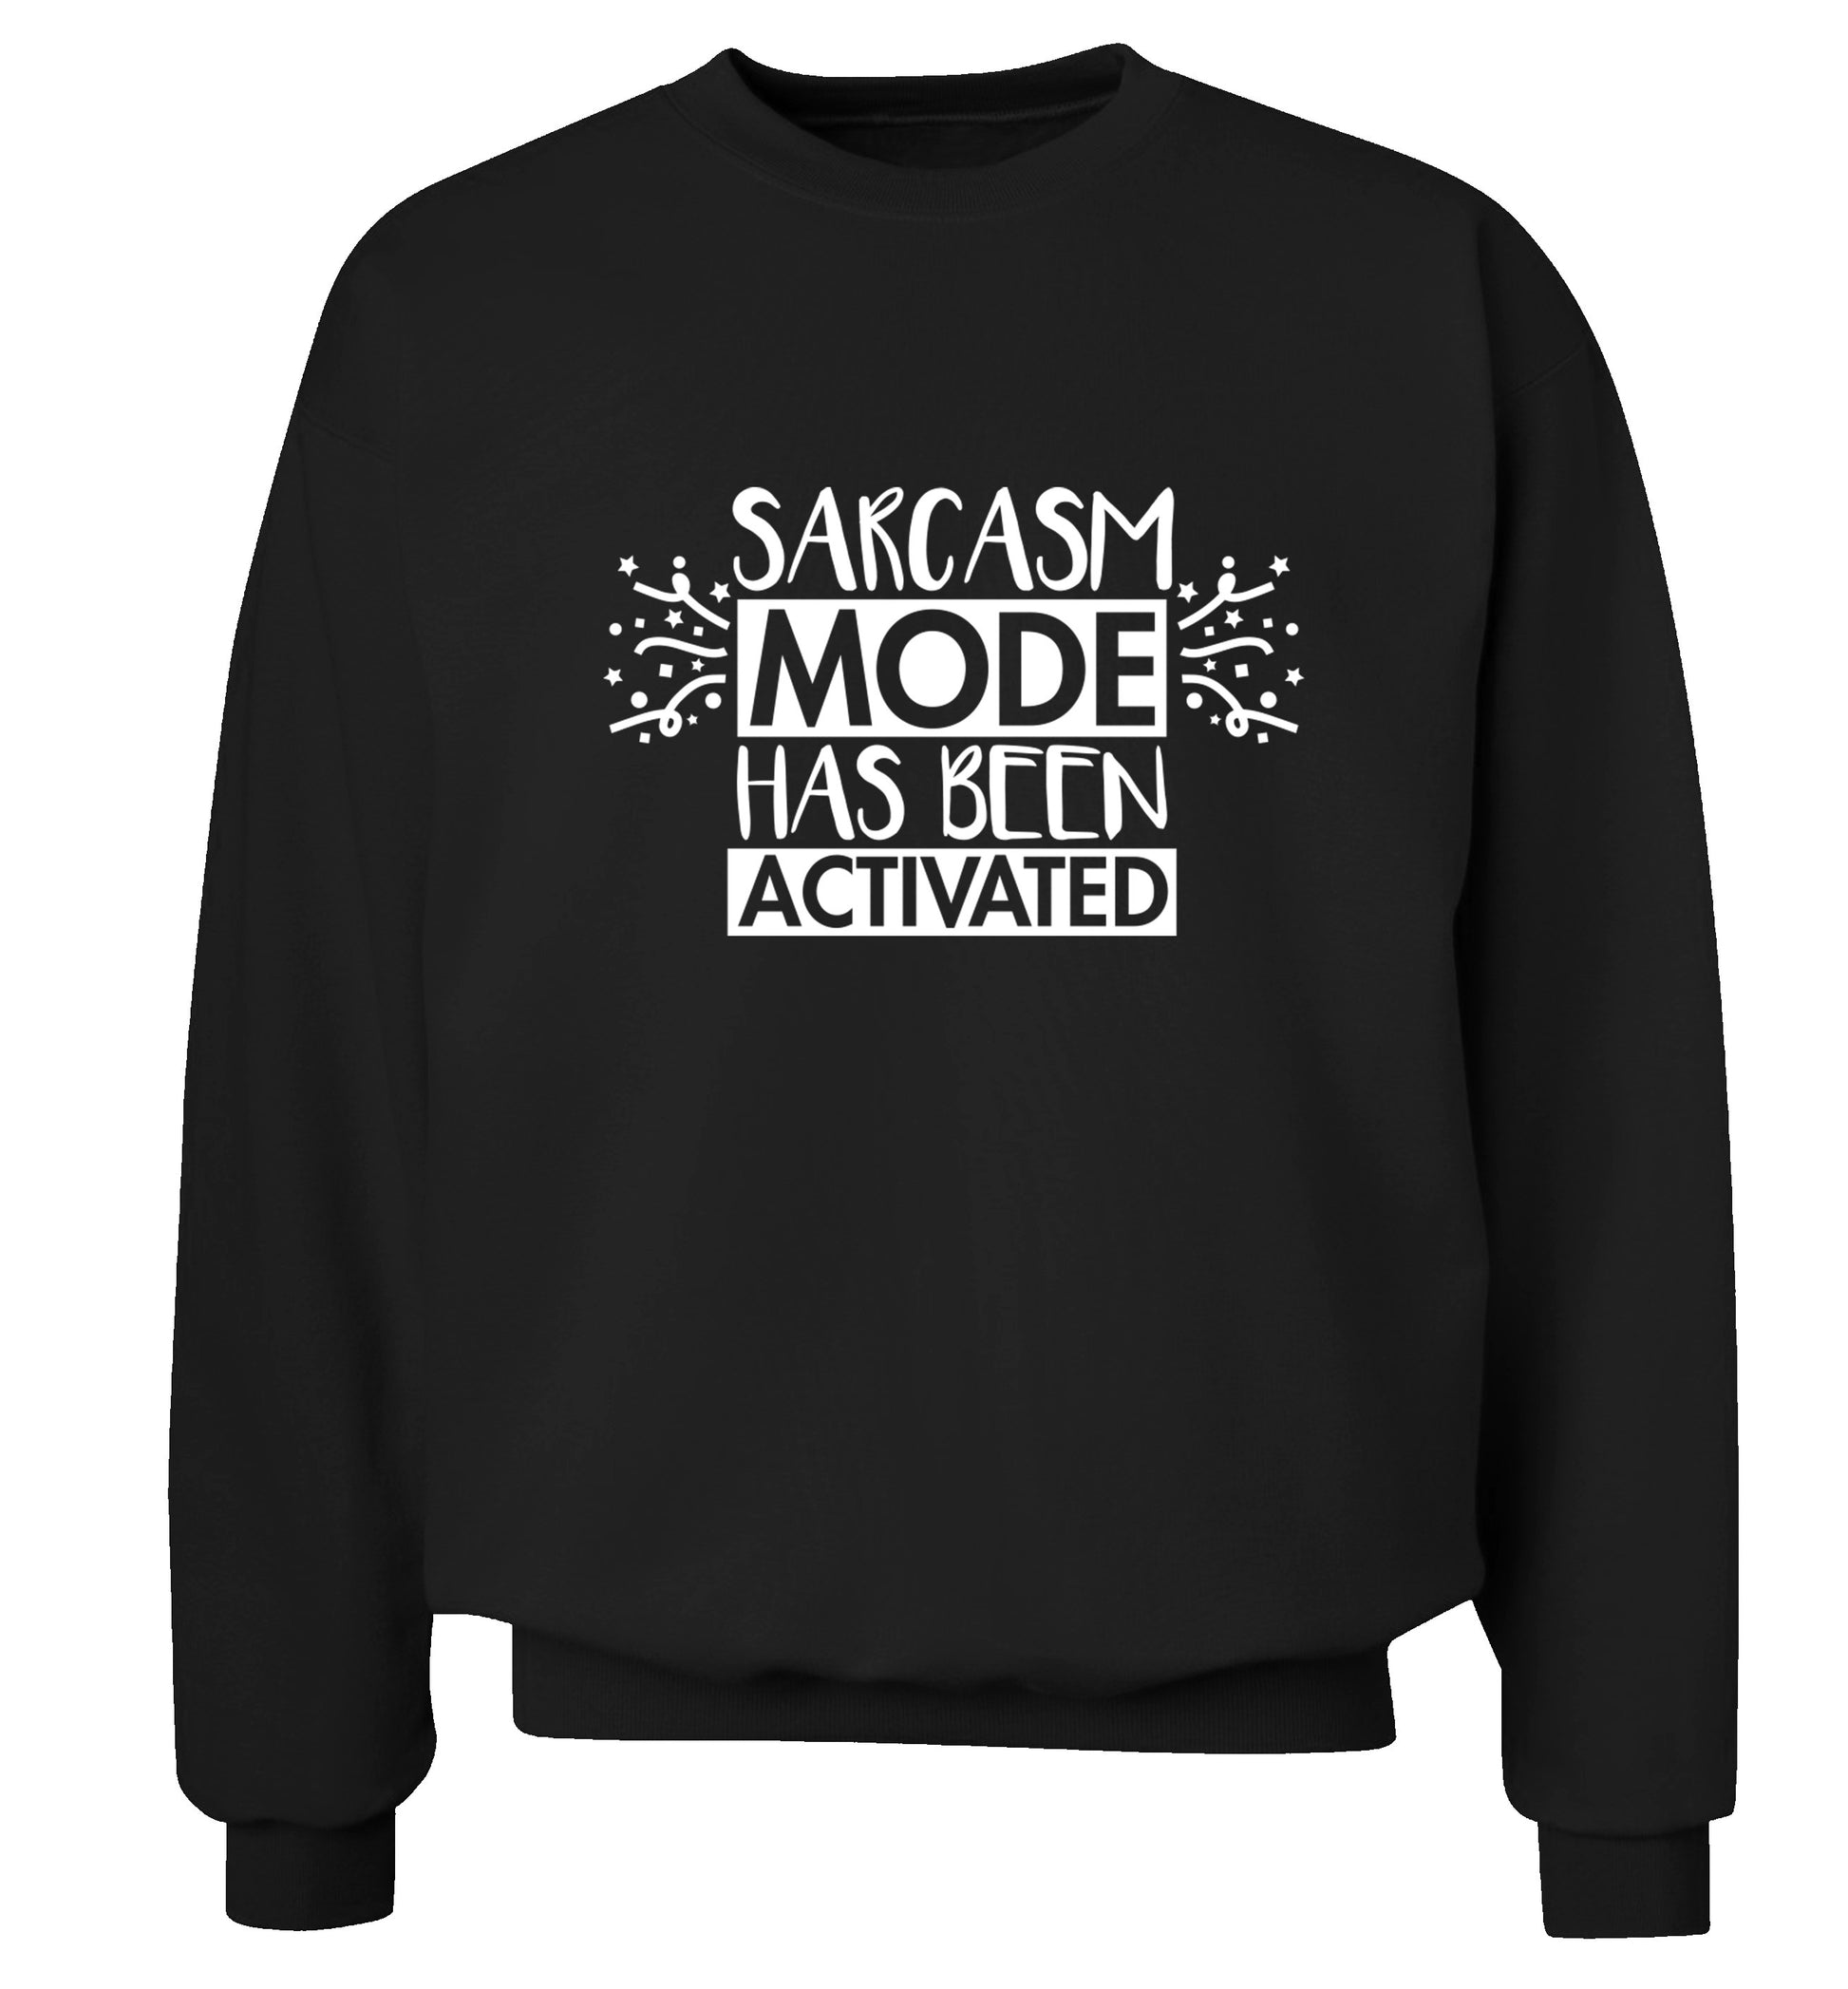 Sarcarsm mode has been activated Adult's unisex black Sweater 2XL